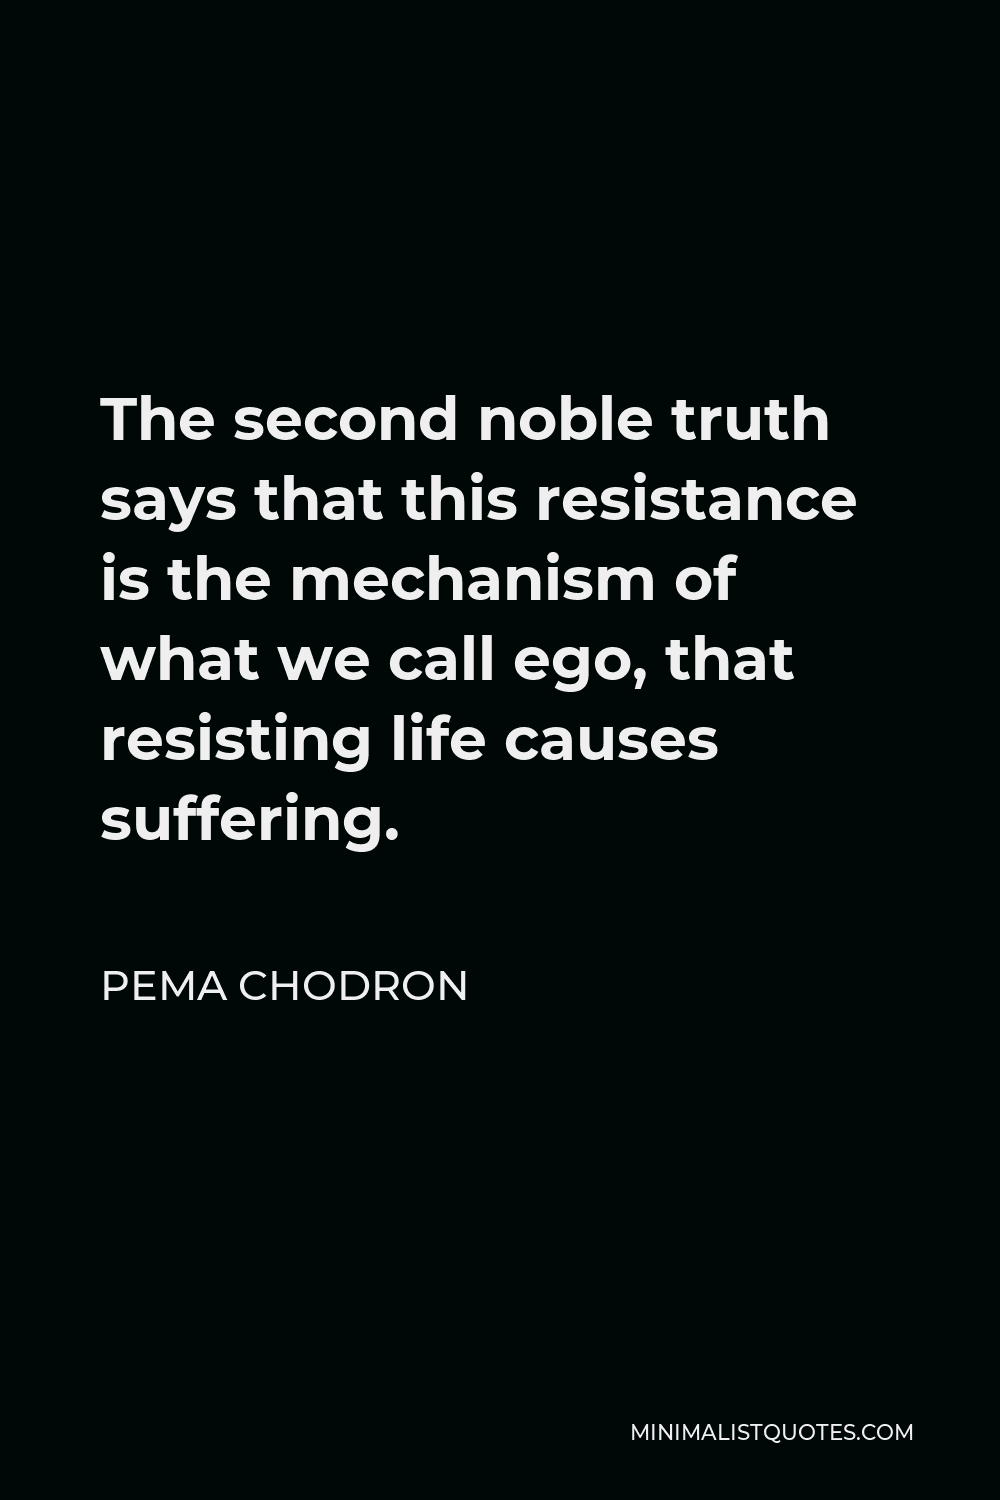 Pema Chodron Quote - The second noble truth says that this resistance is the mechanism of what we call ego, that resisting life causes suffering.